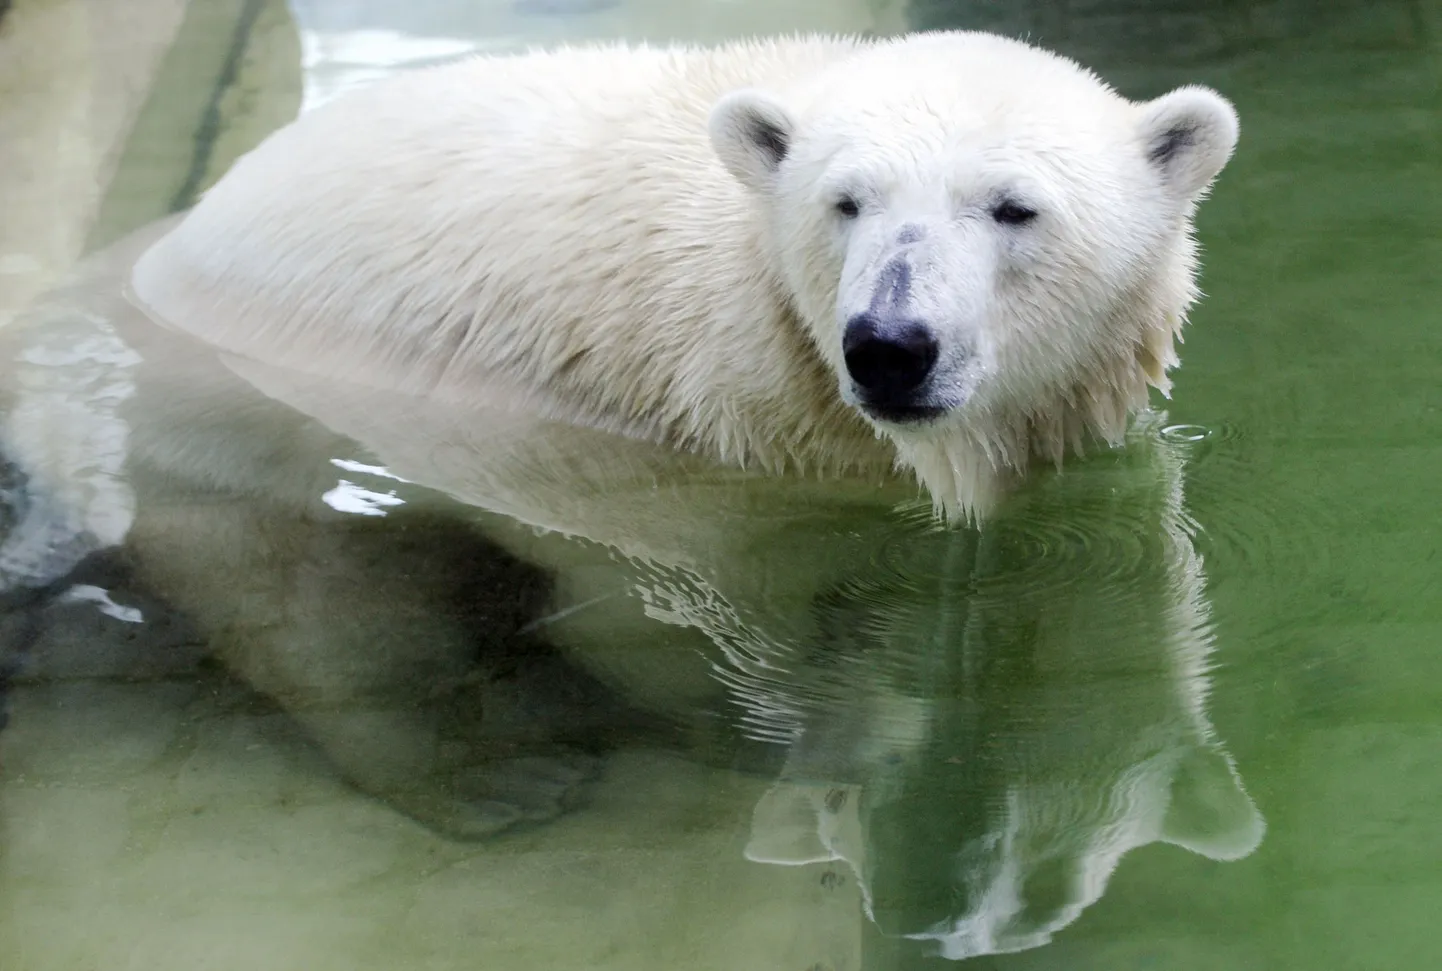 The two-year-old polar bear Gianna can be seen in her enclosure in the zoo in Munich, southern Germany on August 6, 2009. The Berlin polar bear Knut, who became a worldwide media sensation as a cub in 2007, will soon be joined by Gianna, a female companion originally from Italy, German reports said on August 6, 2009. AFP PHOTO DDP/OLIVER LANG    GERMANY OUT